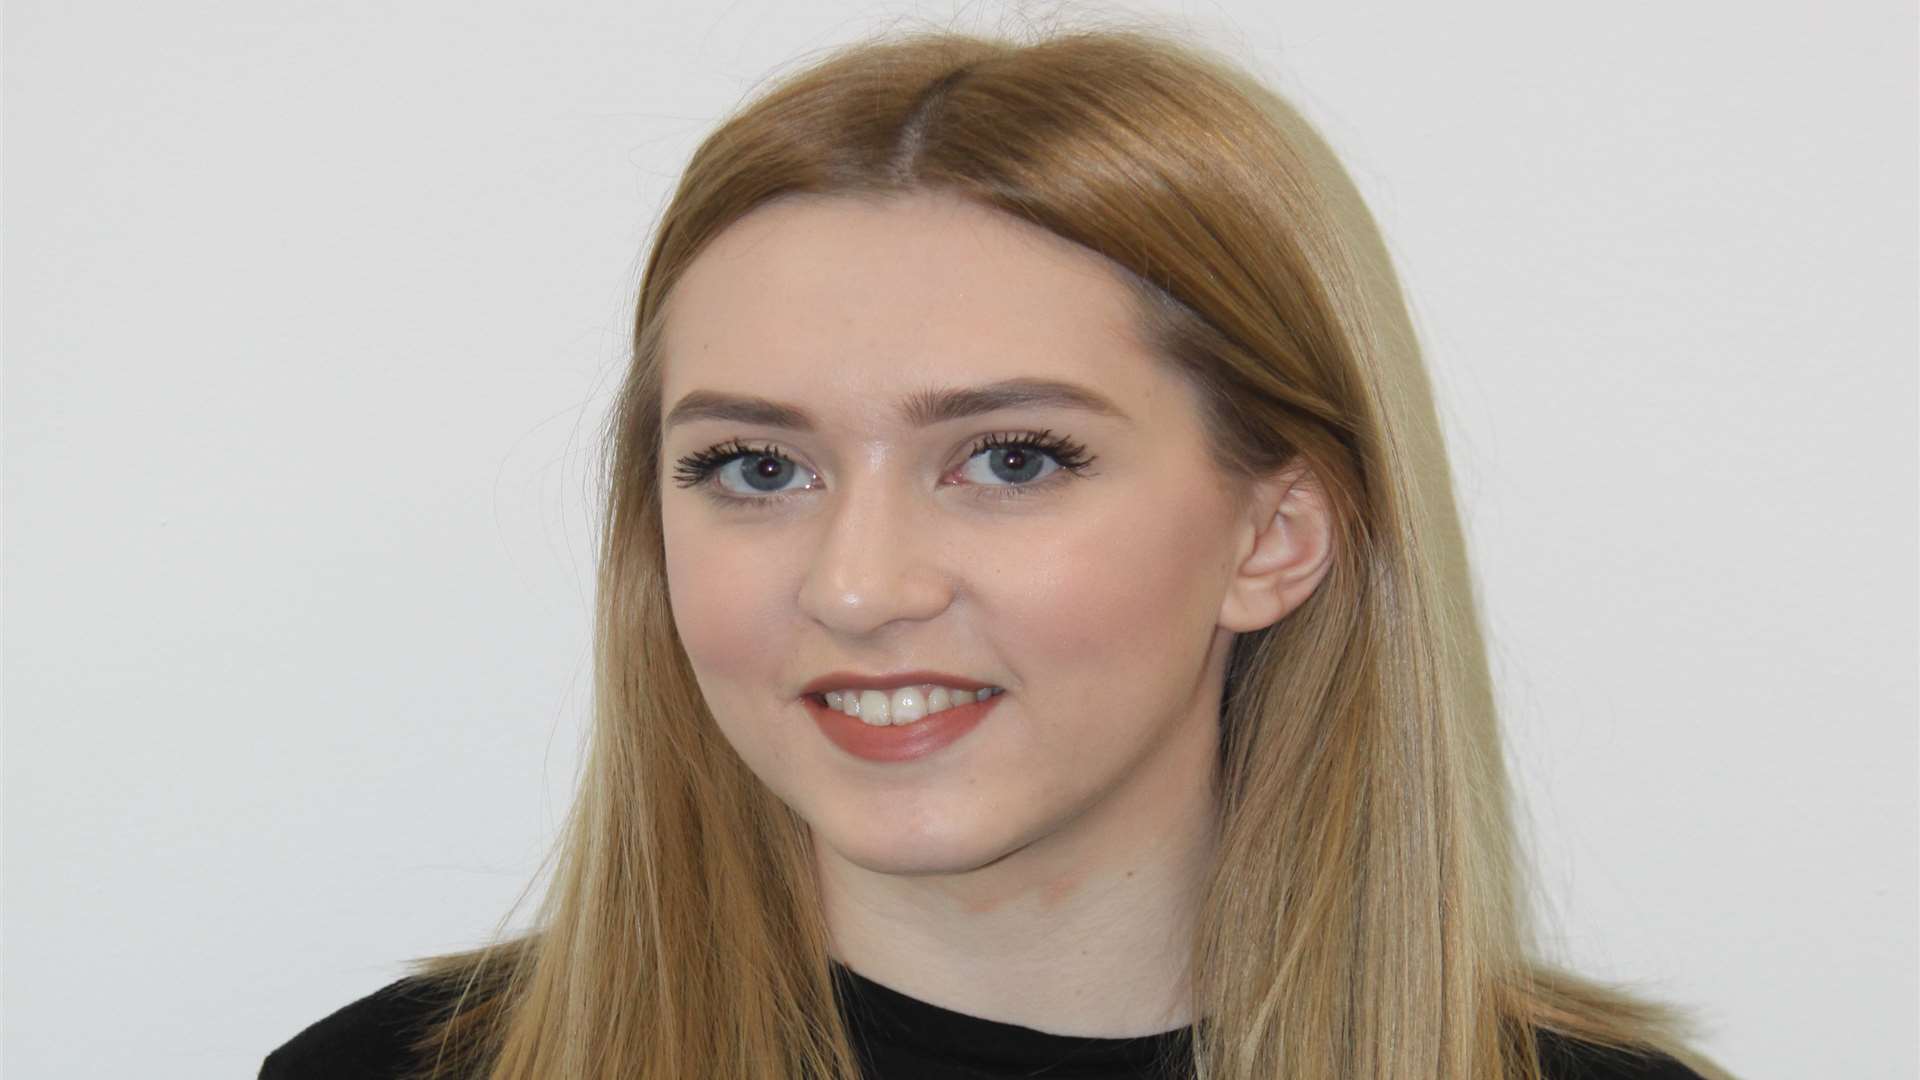 Maisie Wood has been selected as a youth ambassador for The ONE campaign